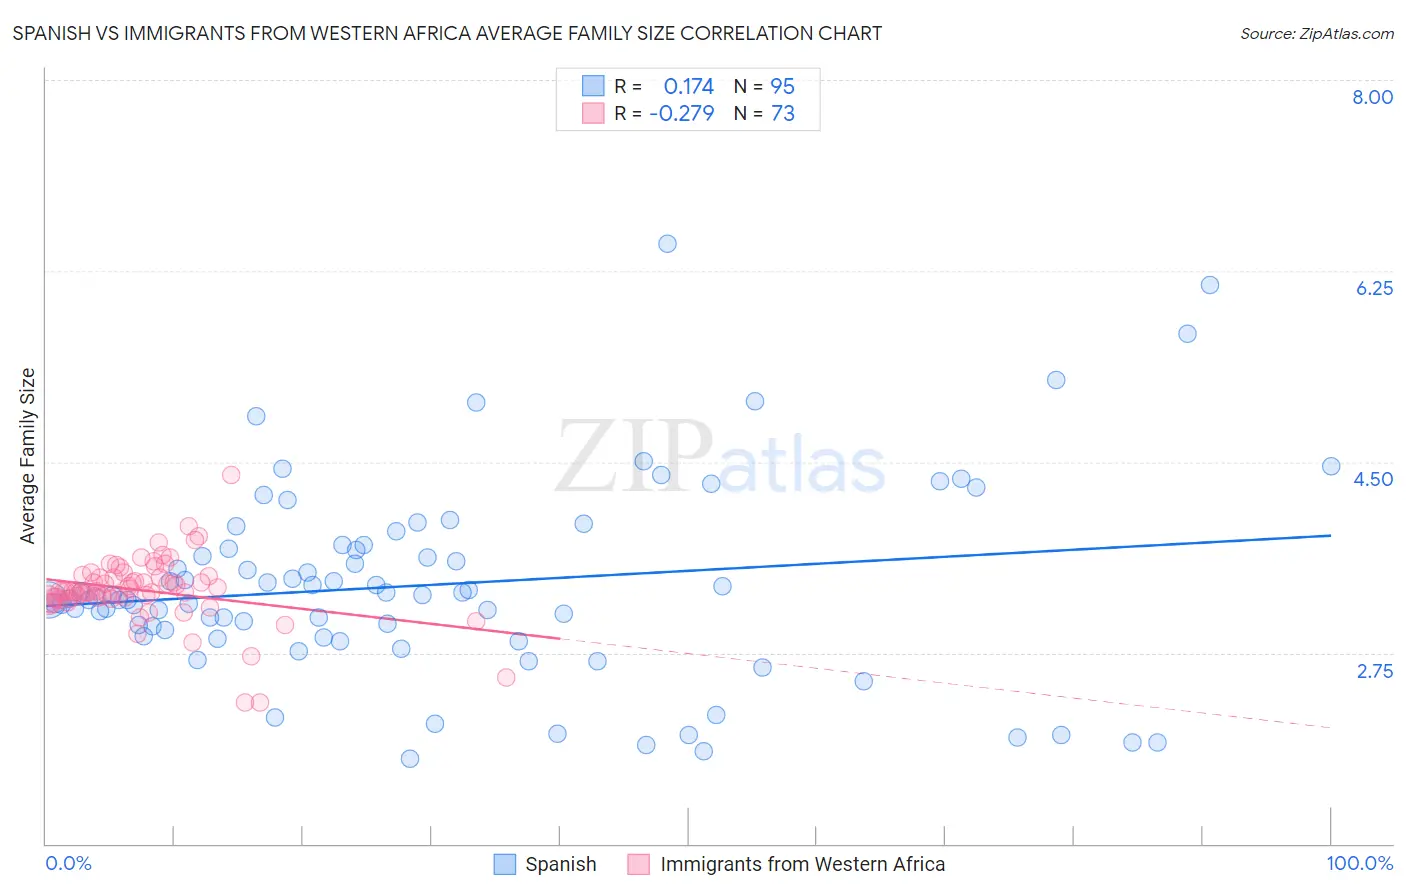 Spanish vs Immigrants from Western Africa Average Family Size